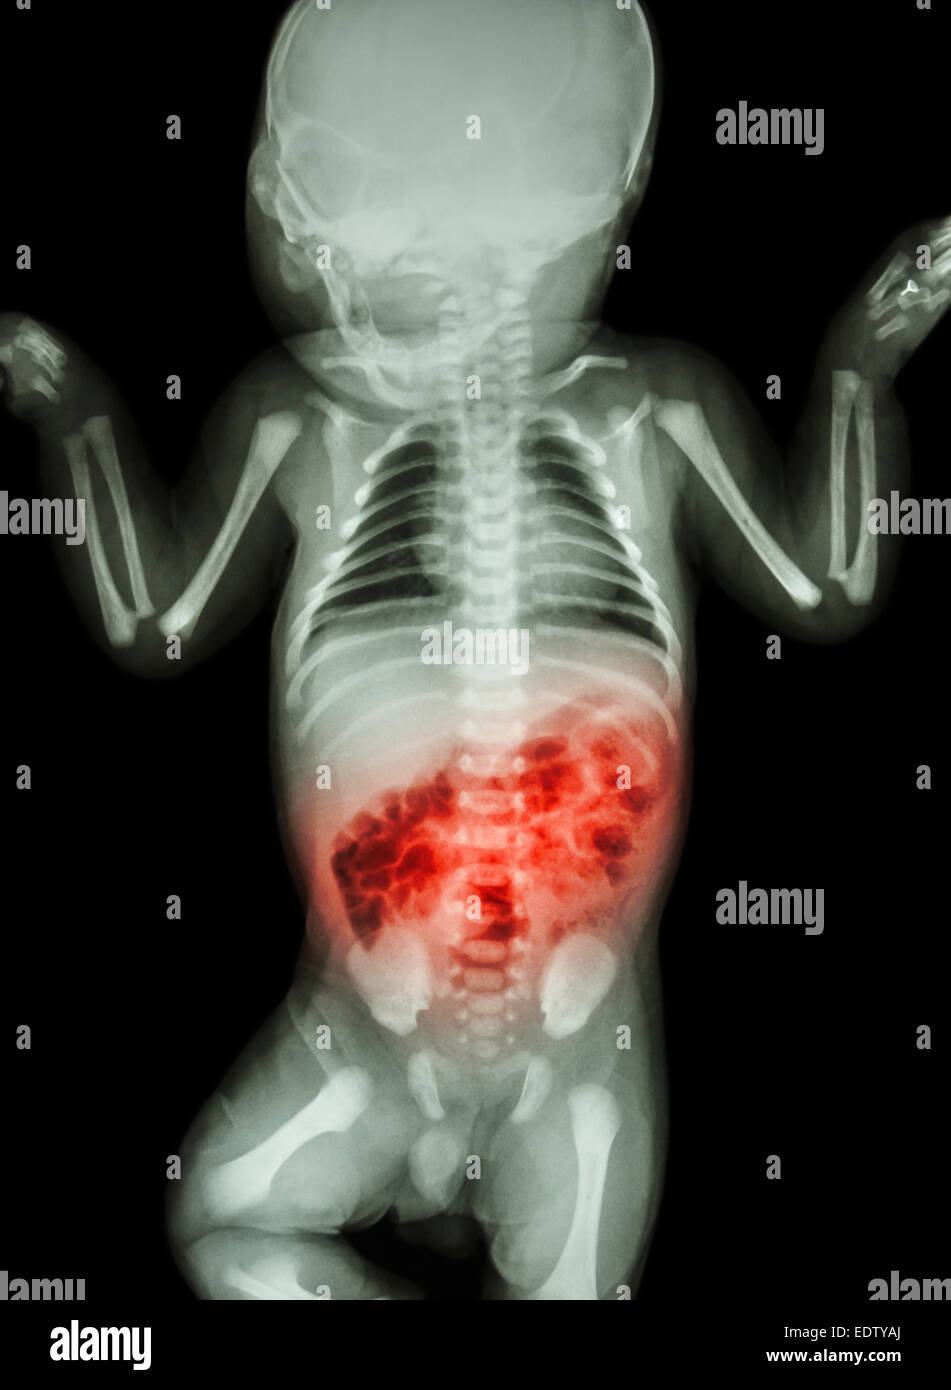 Enteritis (X-ray of sick infant and inflammation of intestine) Stock Photo